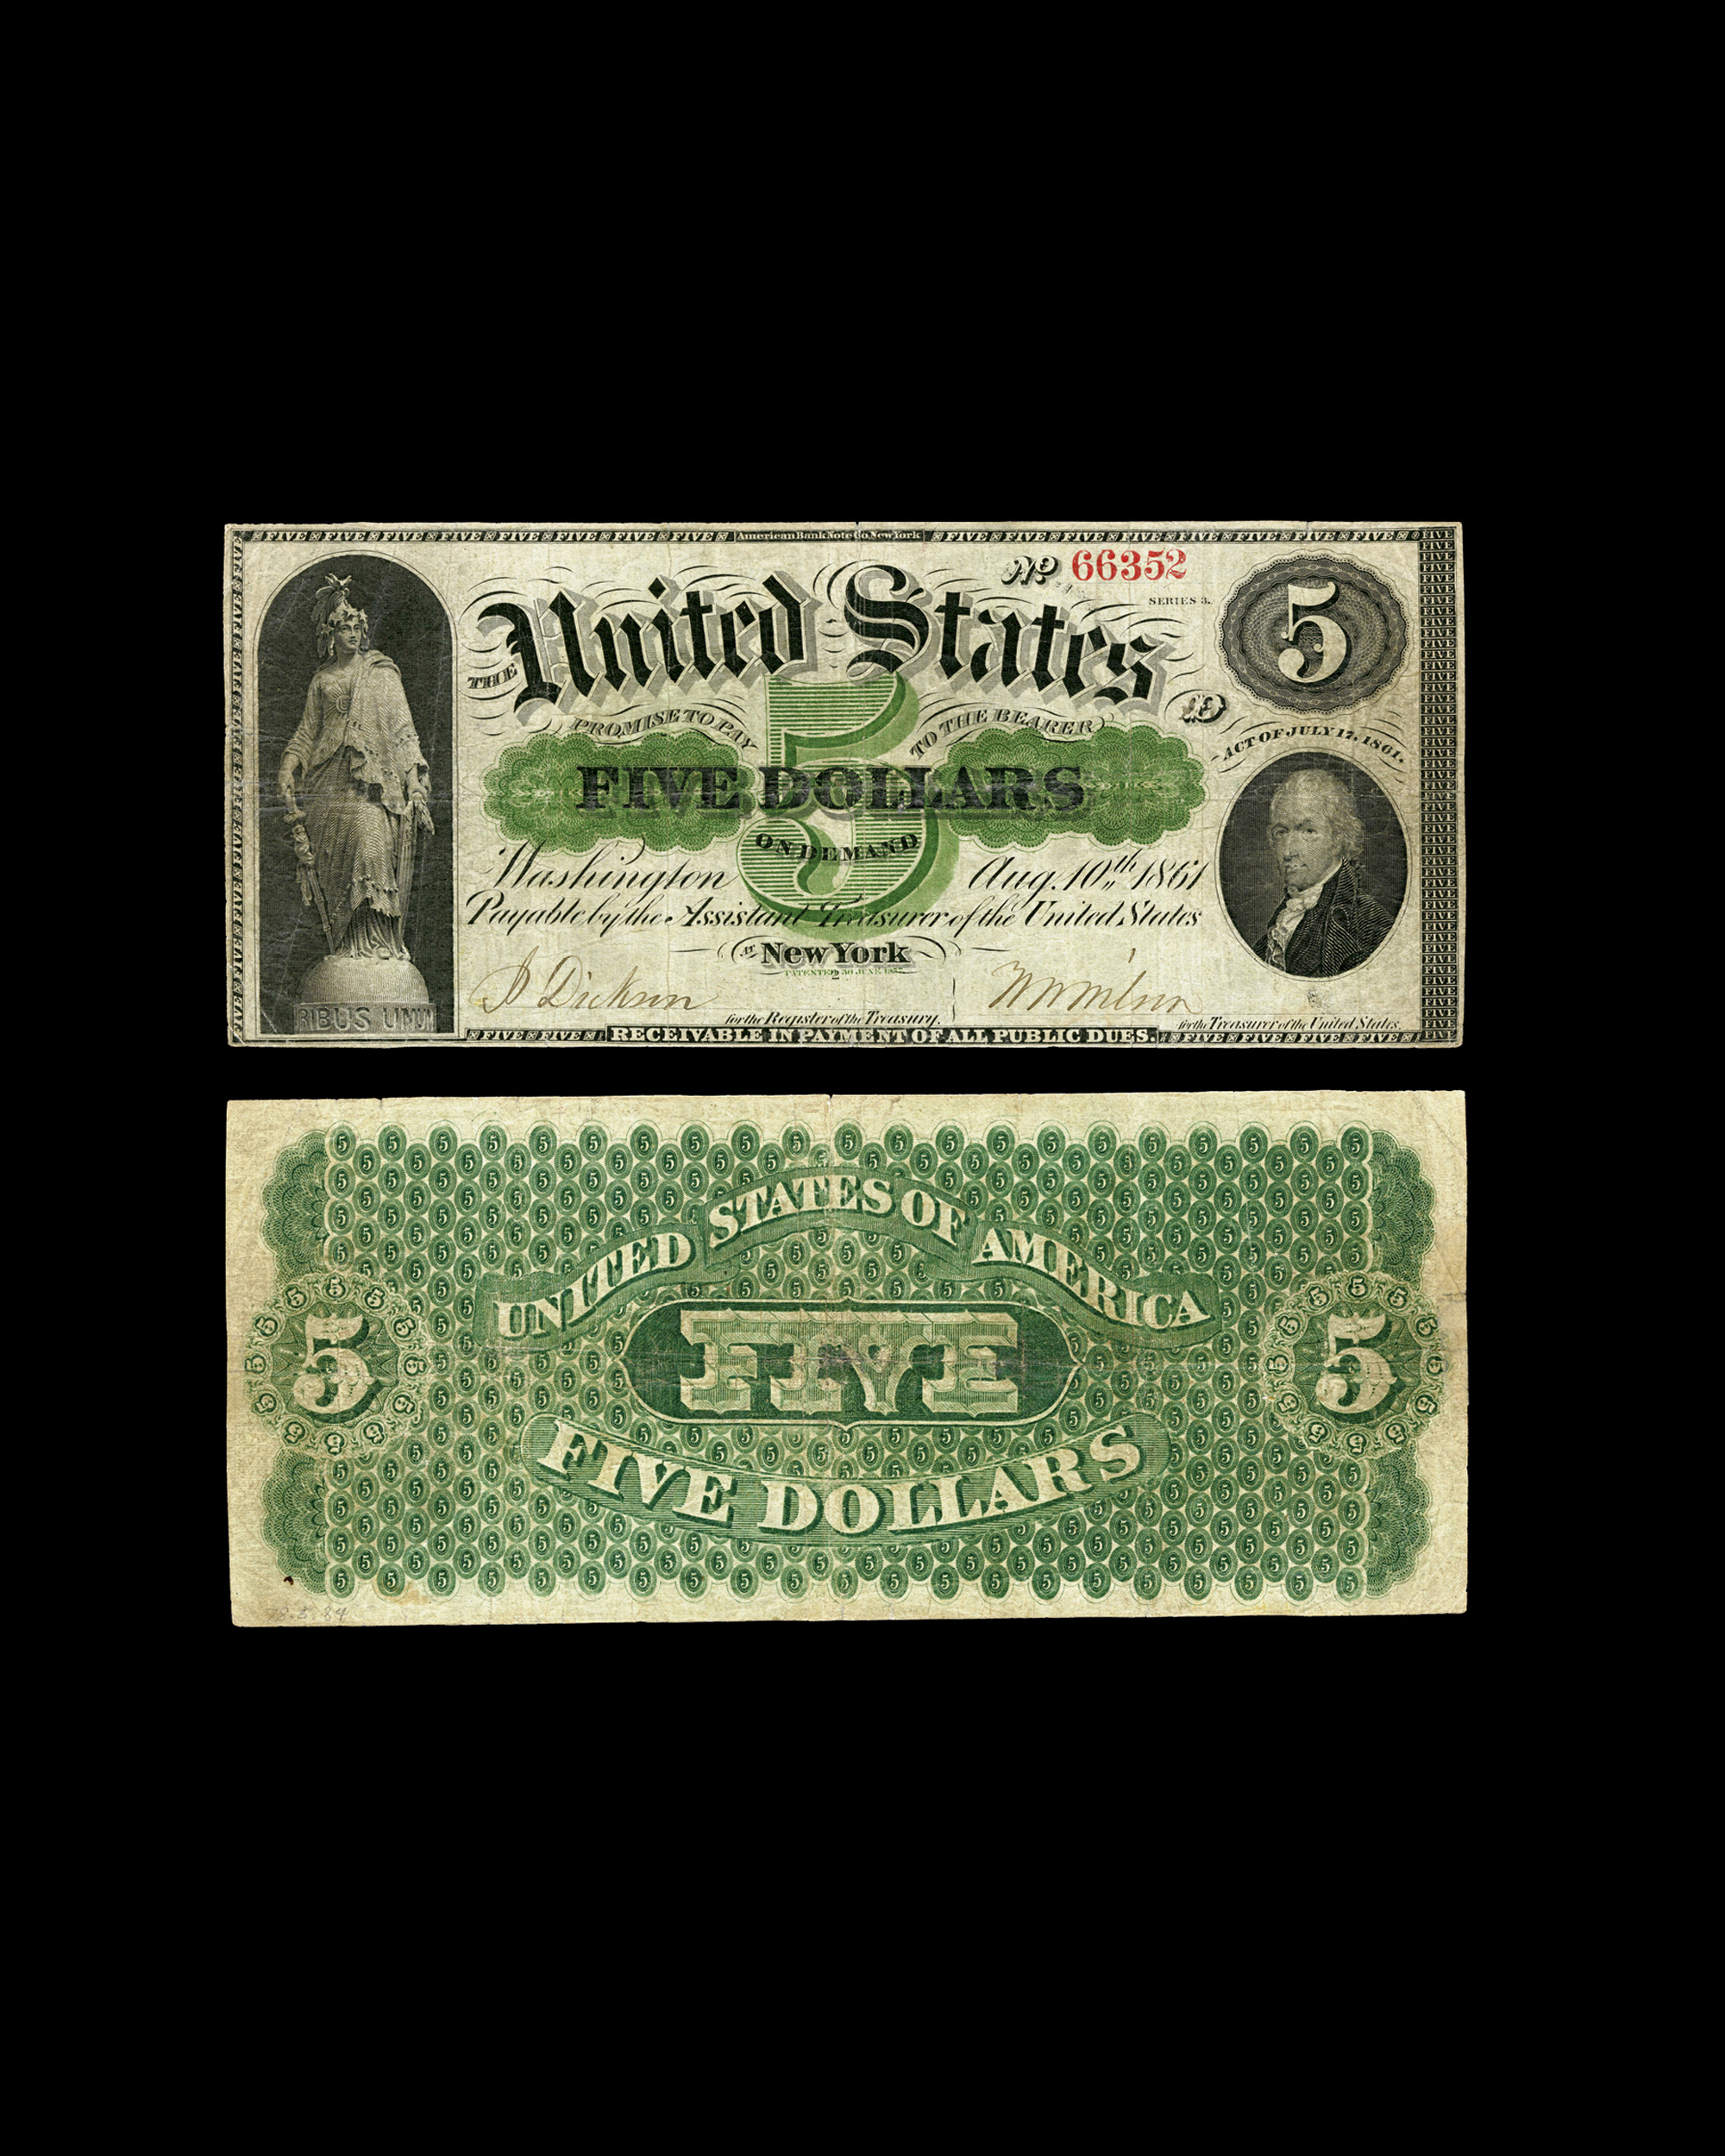 A five-dollar note issued by the US federal government in August 1861, during the early days of Civil War. The figure of Liberty at left wears a brooch marked “U.S.” Her shield contains the national seal, and the national motto “E Pluribus Unum” encircles the base on which she stands.